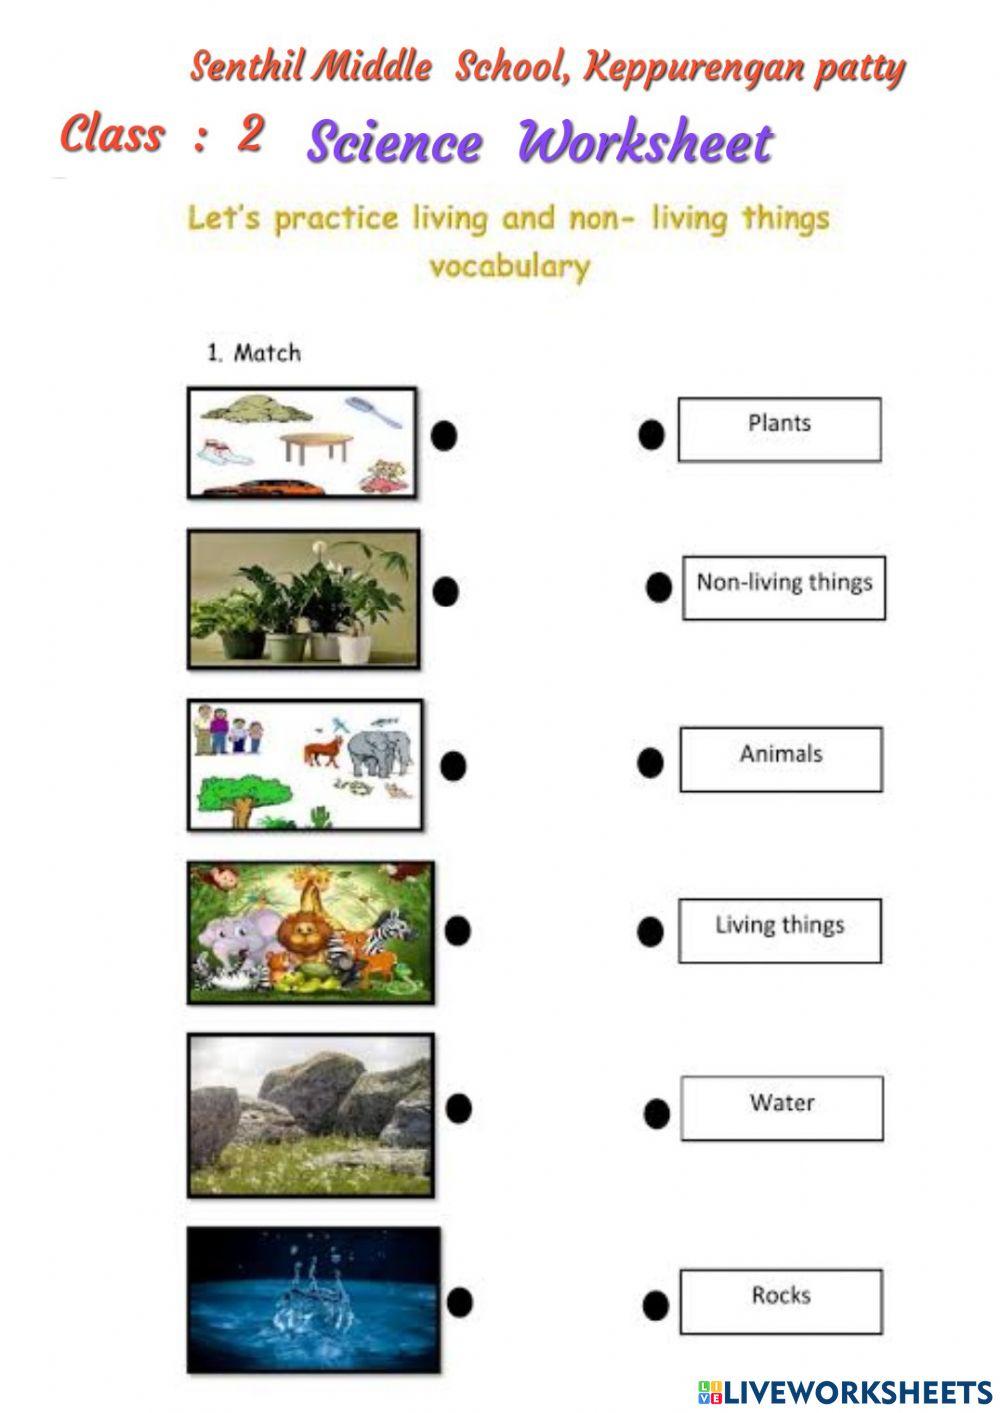 Class:2 -science- living and non living things worksheet- senthil middle school, keppurengan patty, prepared by r.kumanan,